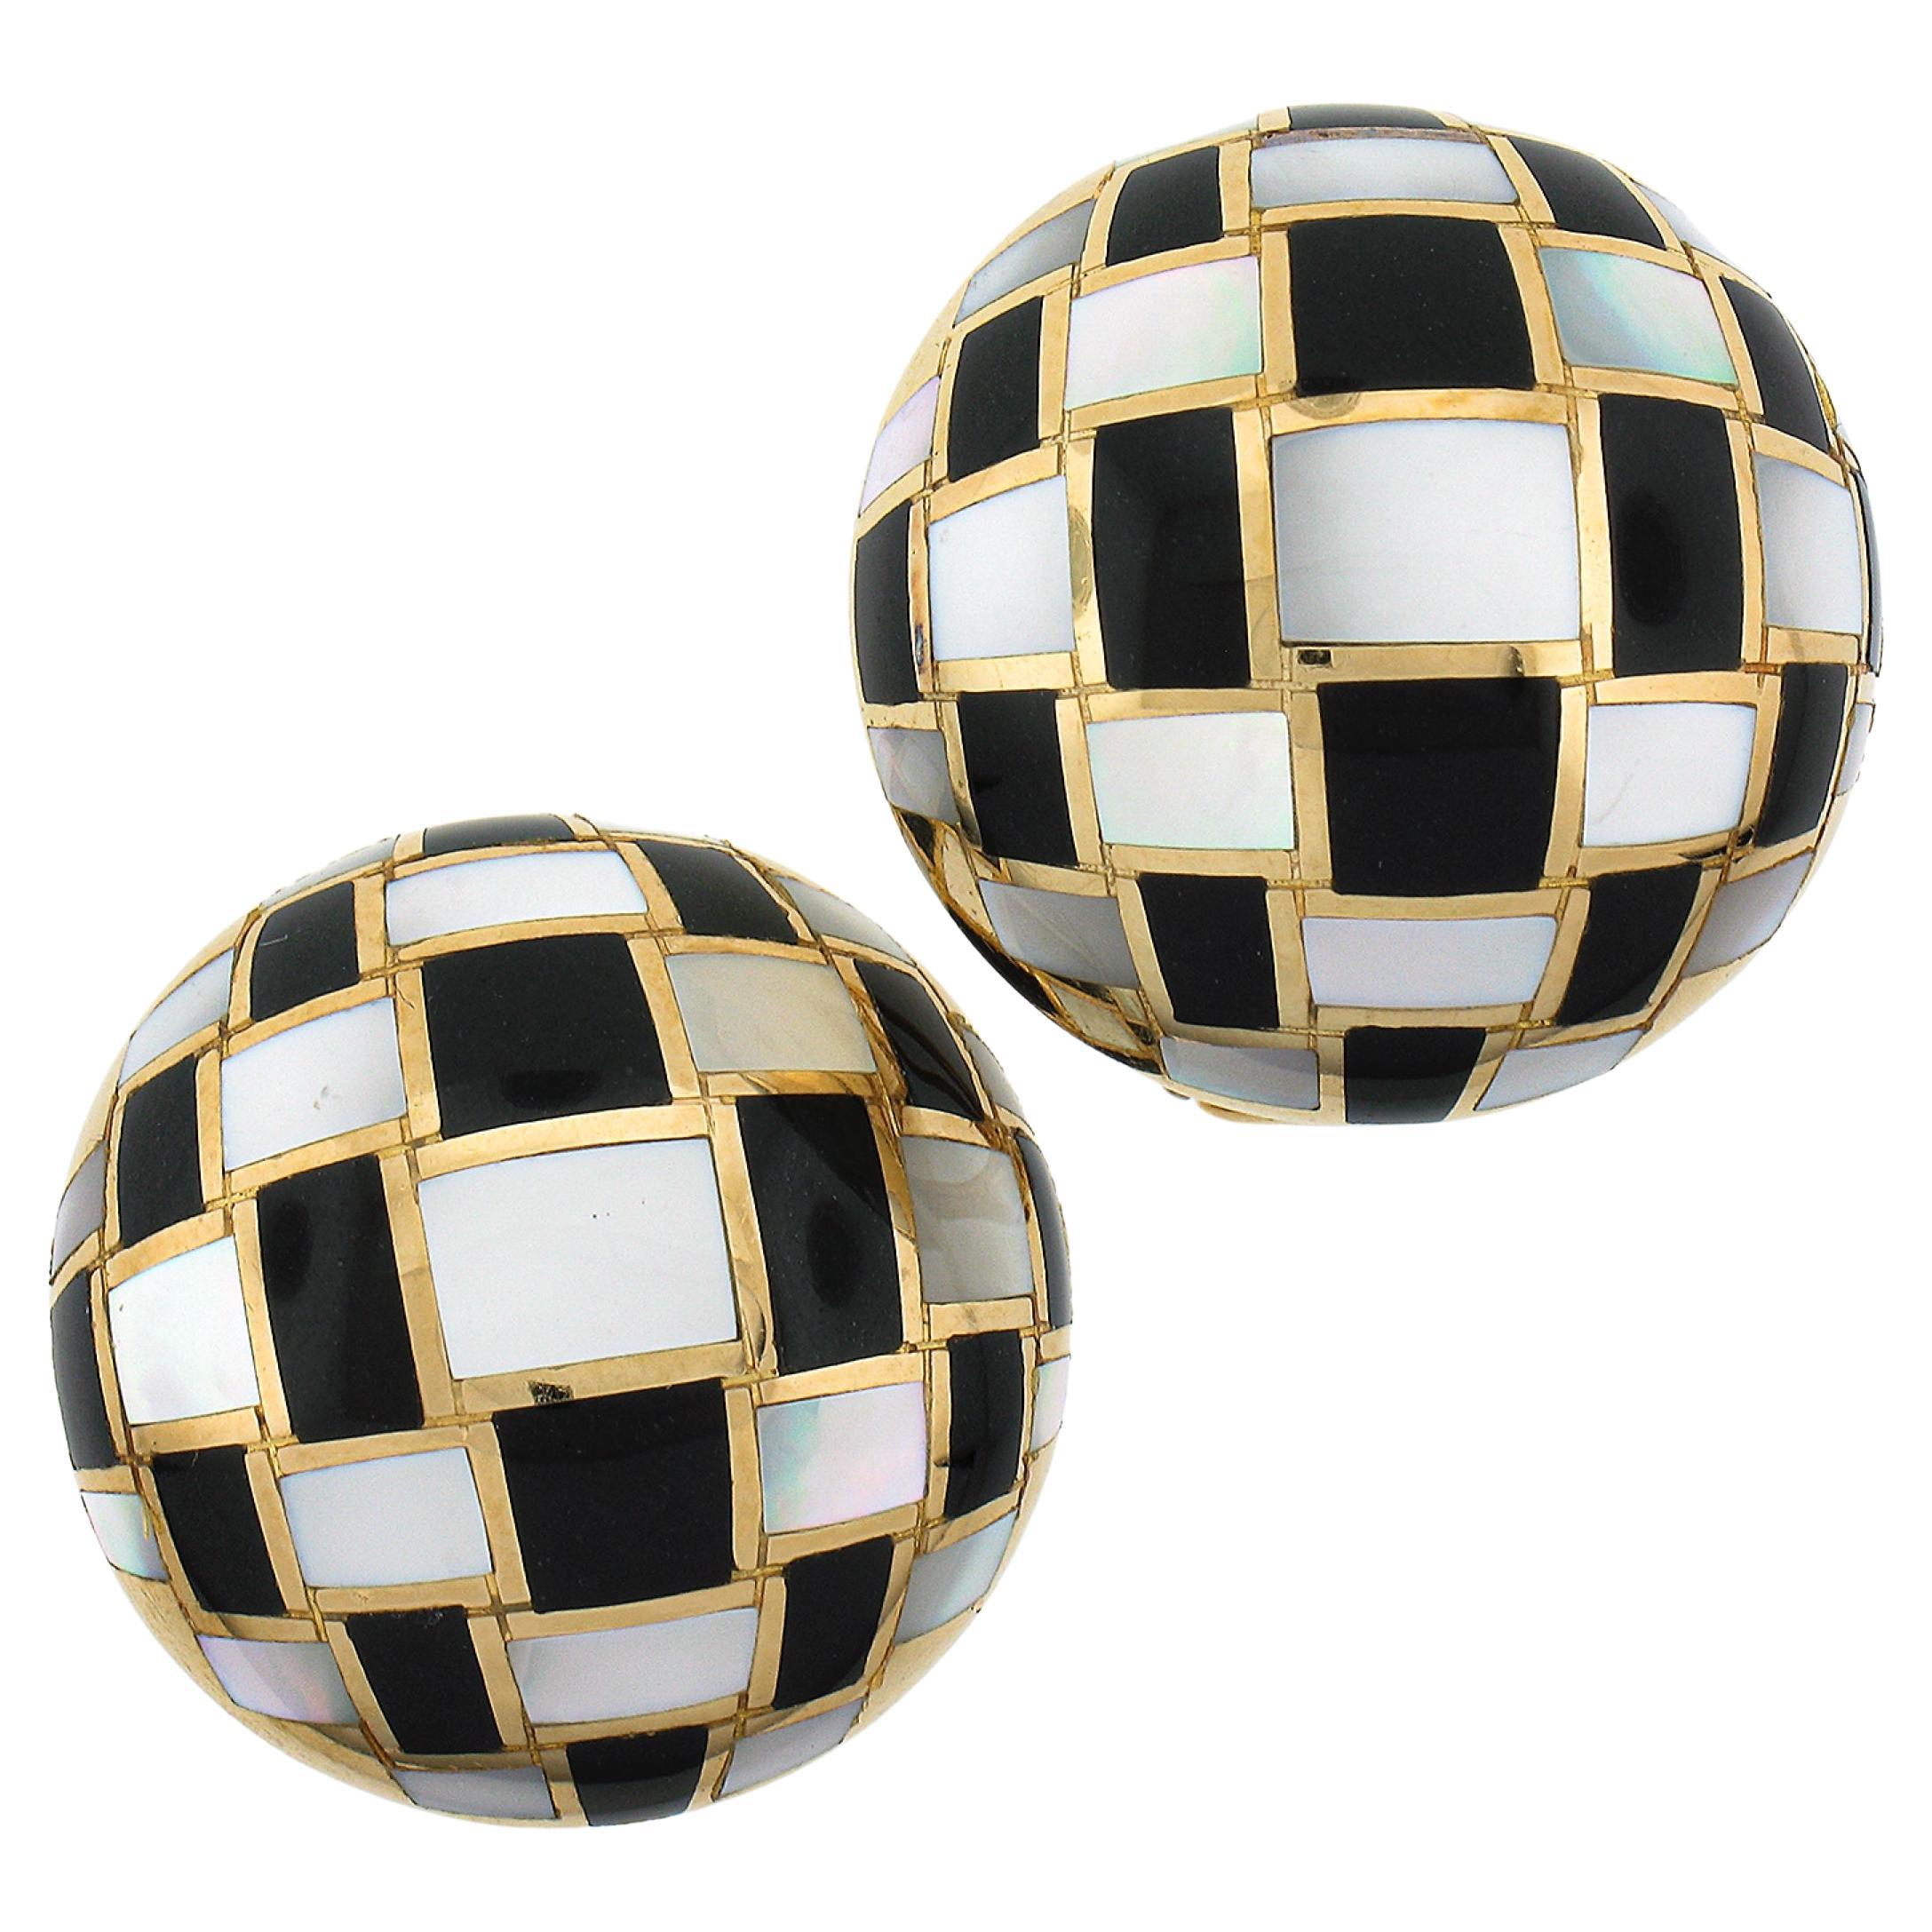 Tiffany & Co. 18k Gold Inlaid Black Onyx & Mother of Pearl Checkerboard Earrings